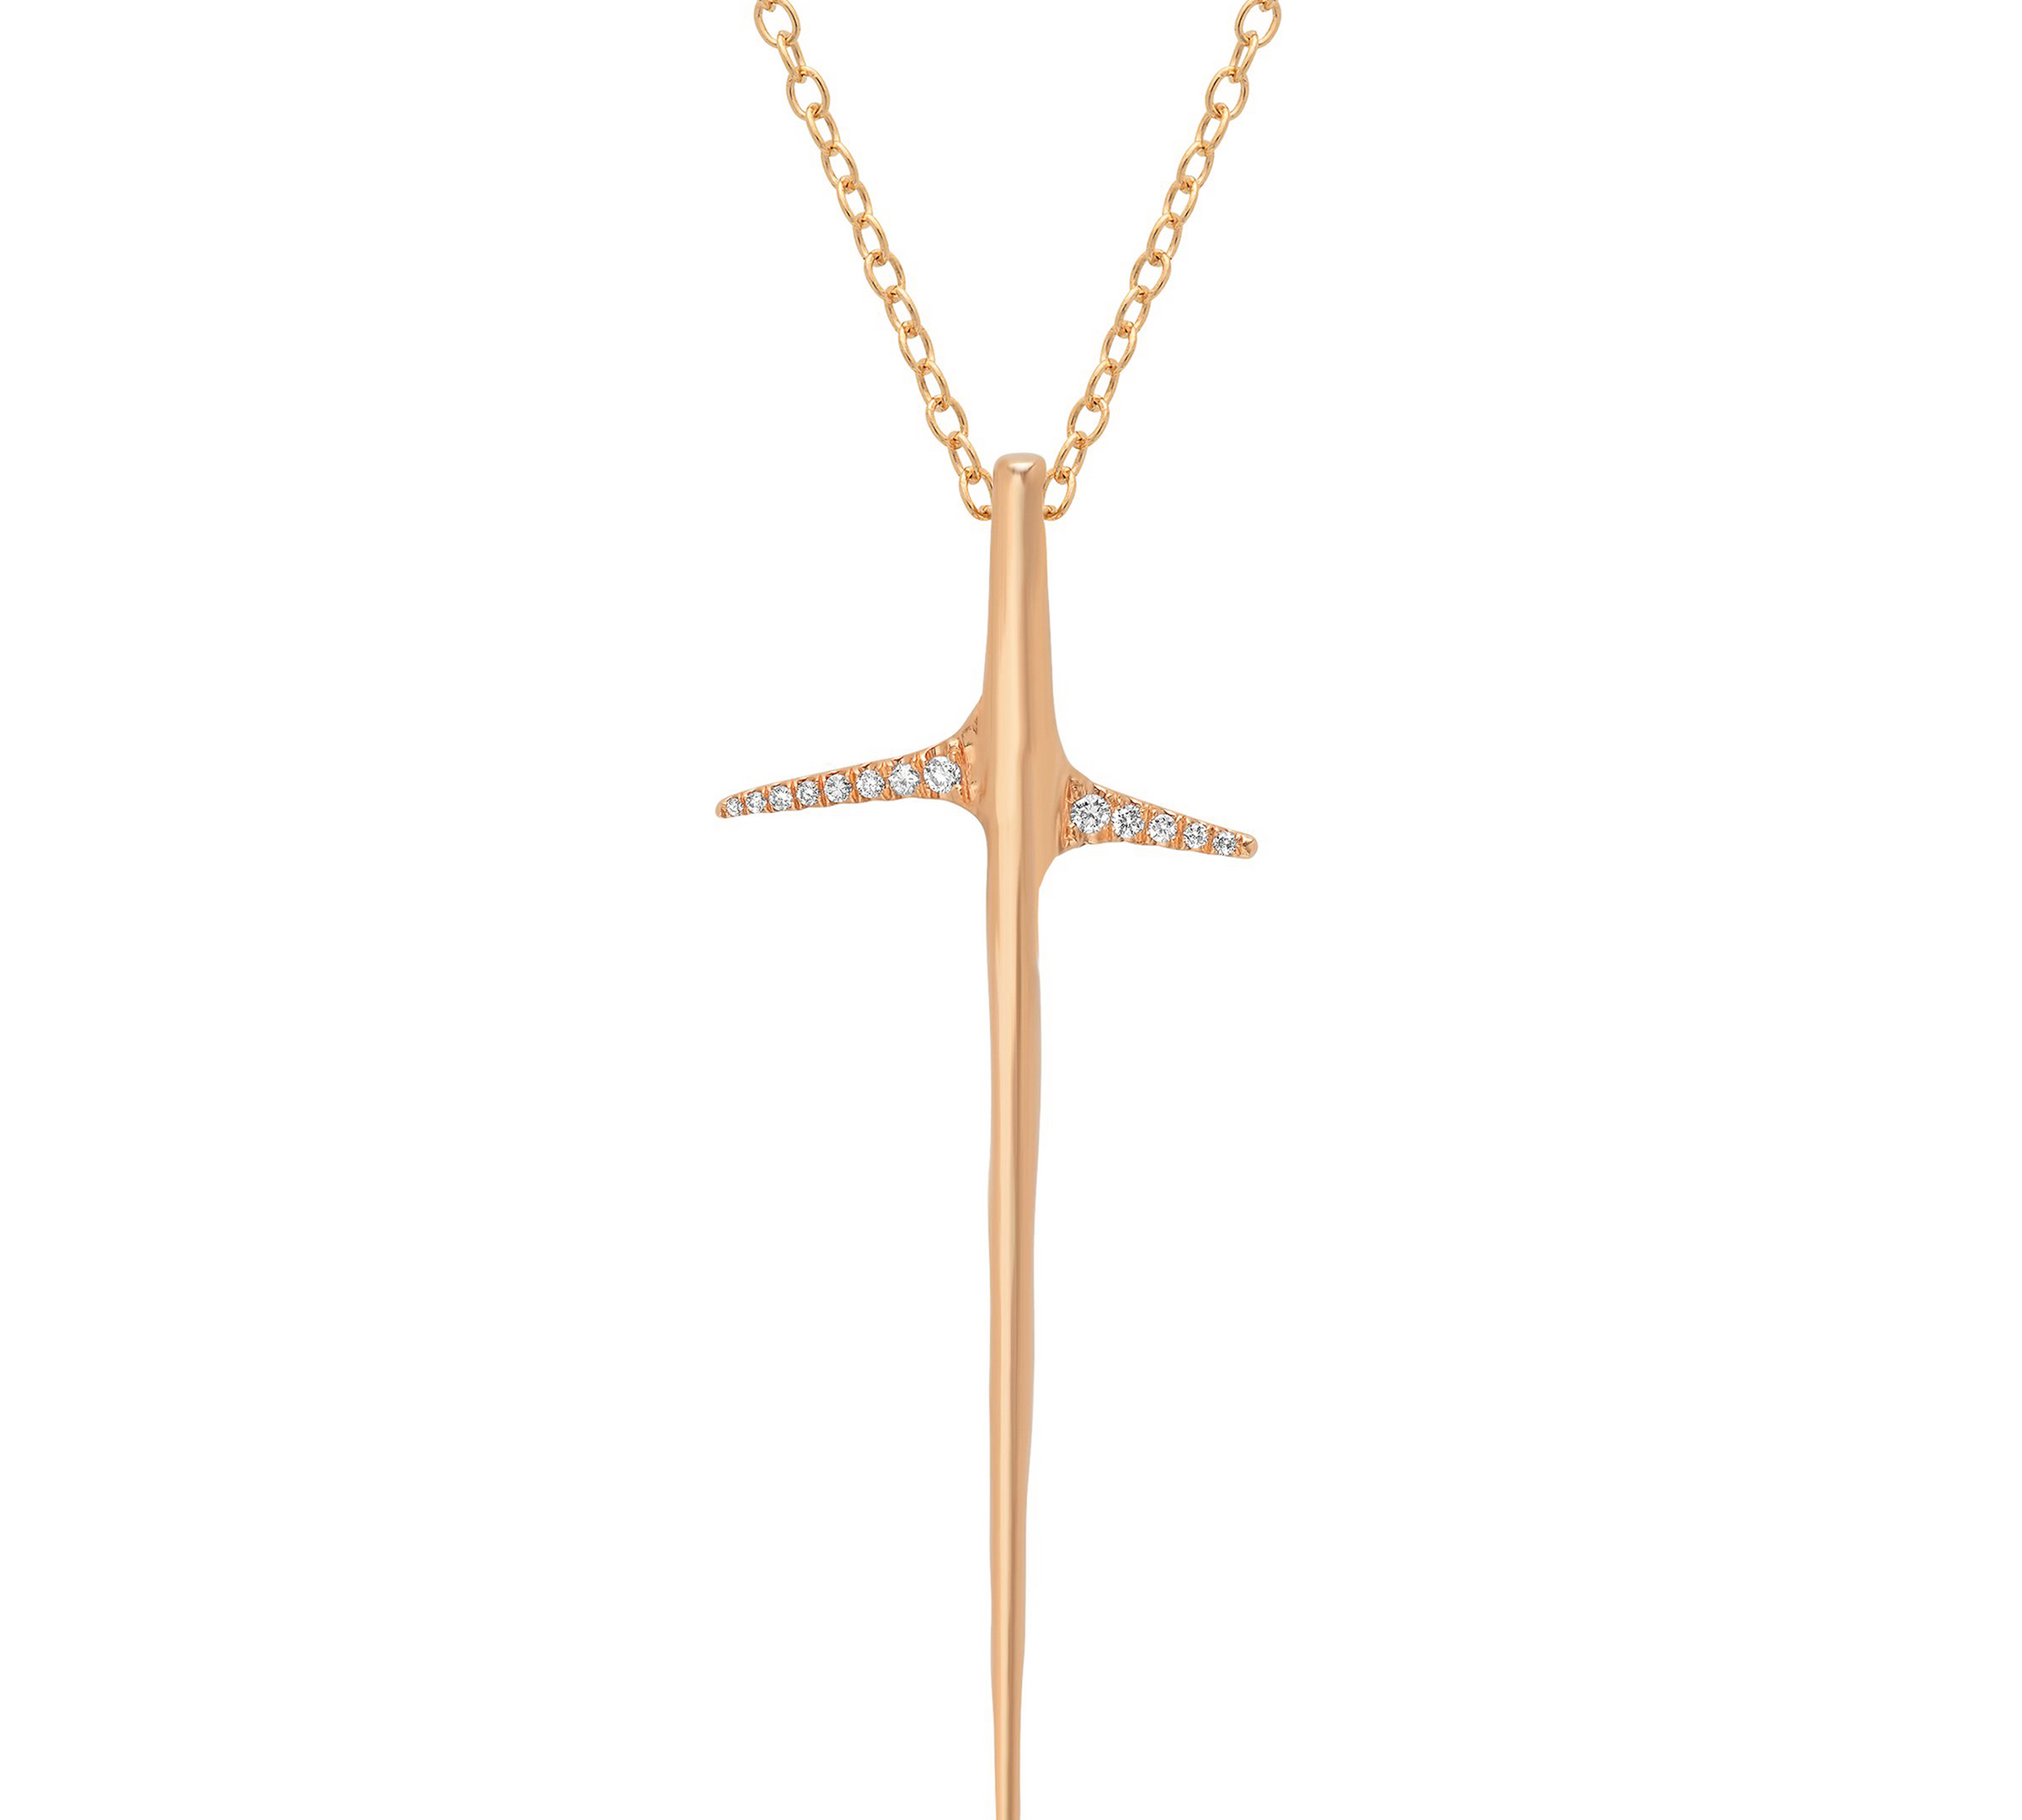 Thorn Necklace Pendant Elisabeth Bell Jewelry Small Rose Gold Diamonds